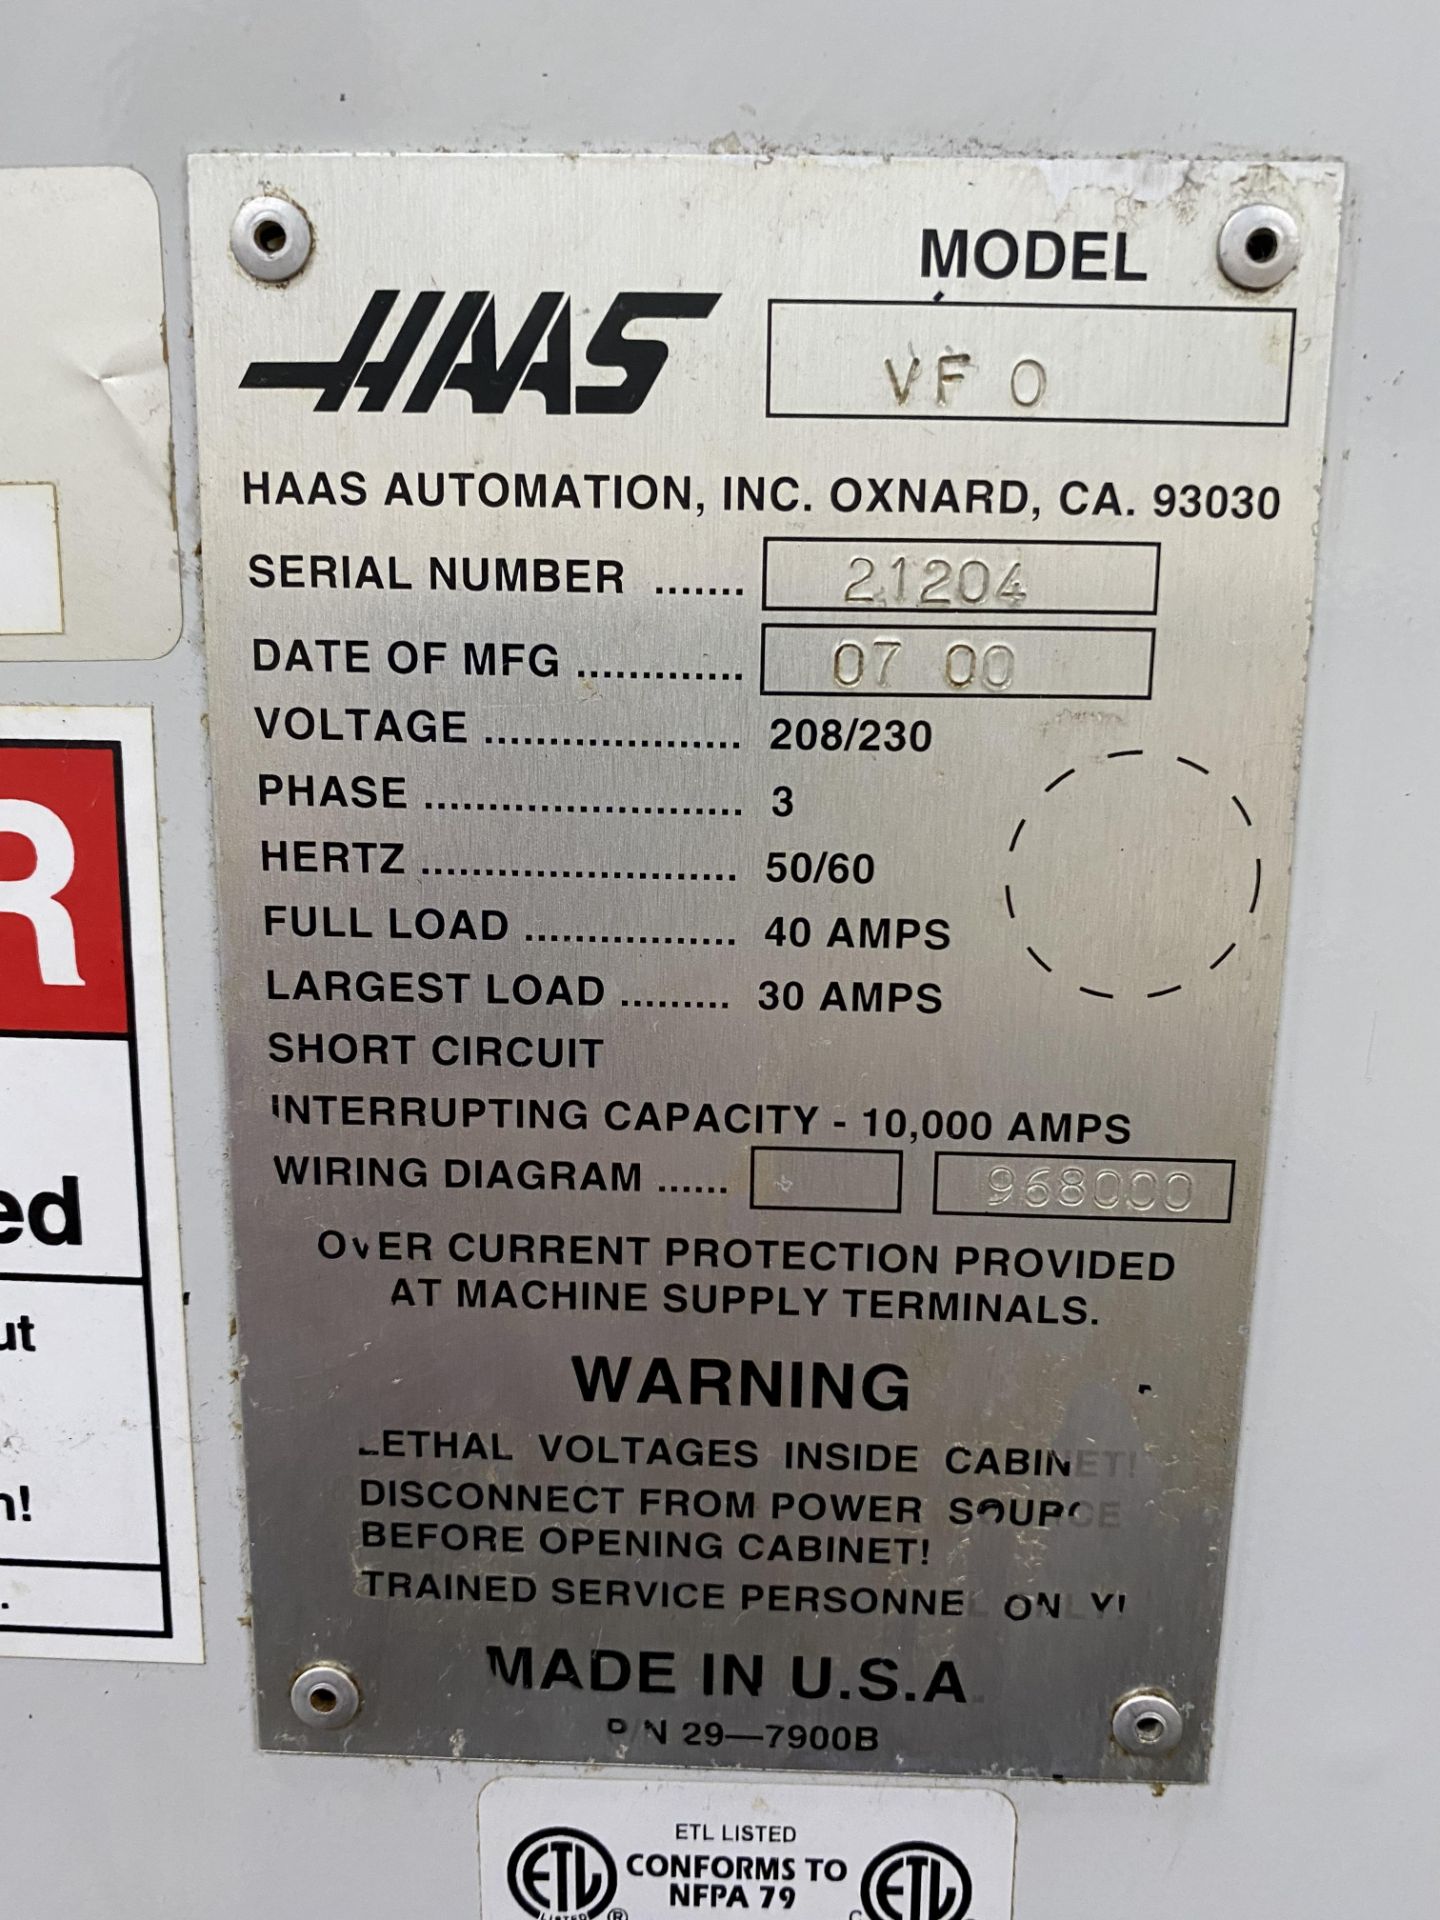 2000 Haas VF-0 4-Axis CNC VMC s/n 21204 w/ Haas Controls, 20-Station ATC, SOLD AS IS - Image 12 of 12